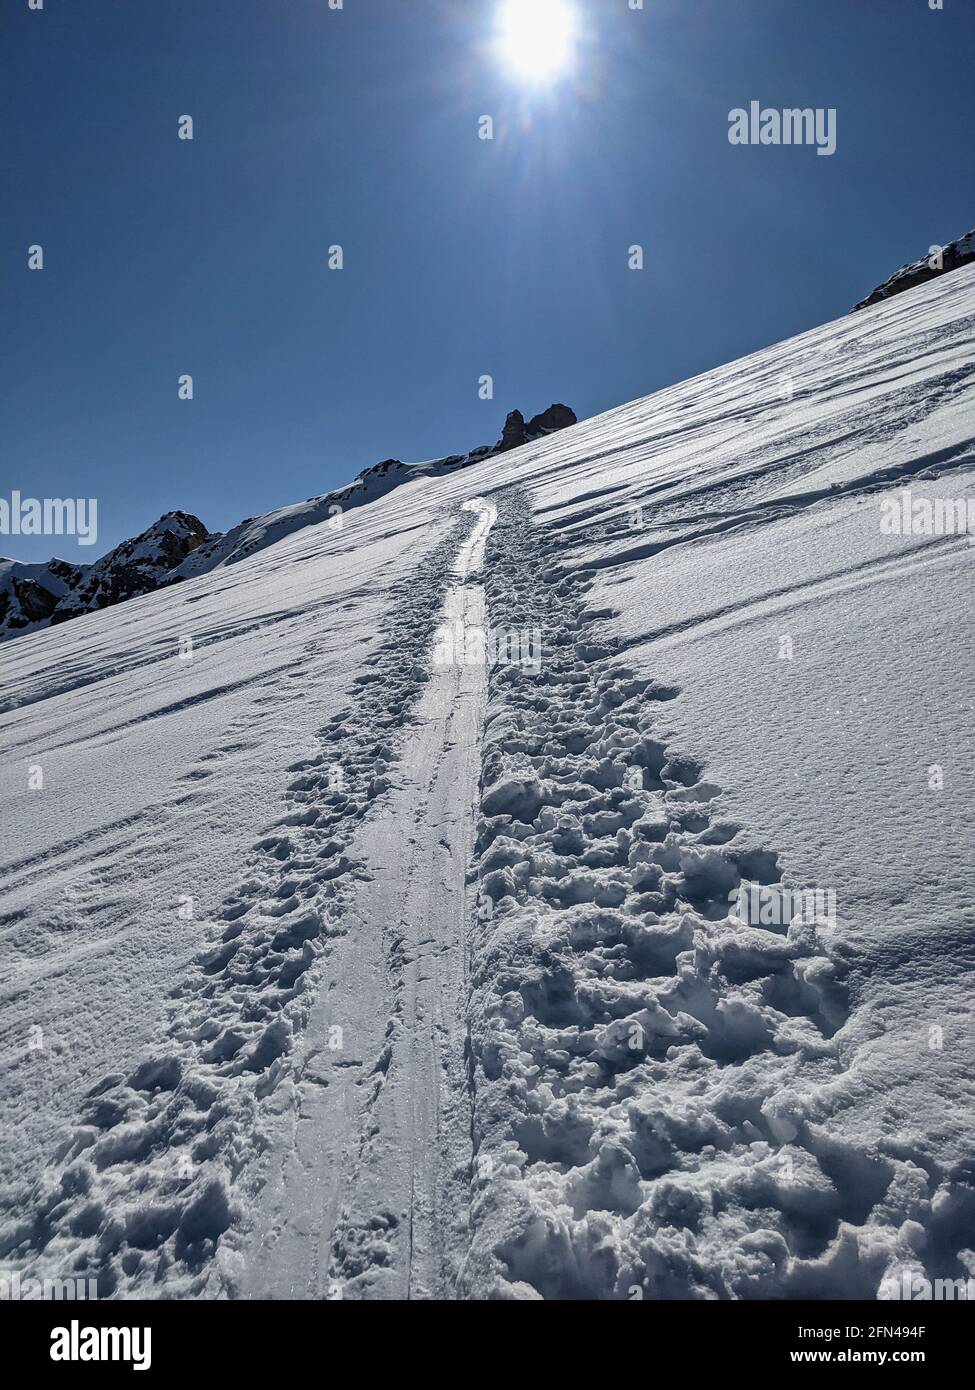 ski touring track in a grandiose winter landscape with high mountains. Mountaineering in the swiss alps. Gemsfairenstock Stock Photo